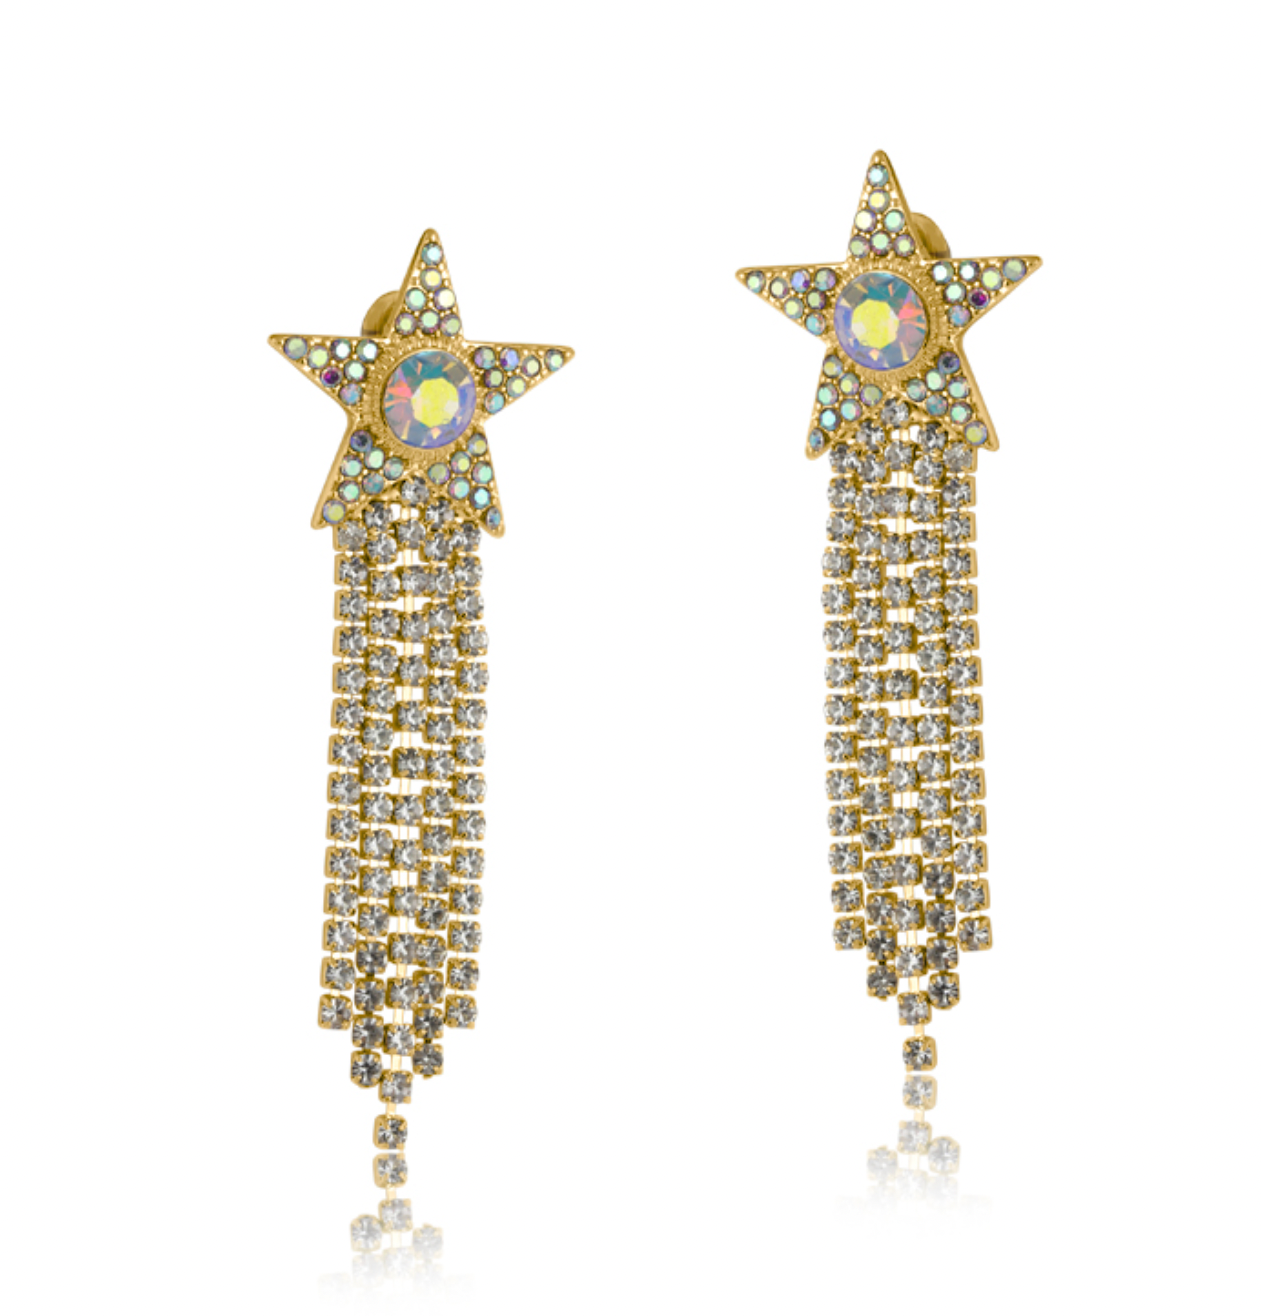 Very Sparkly Star Drop Evening Earrings